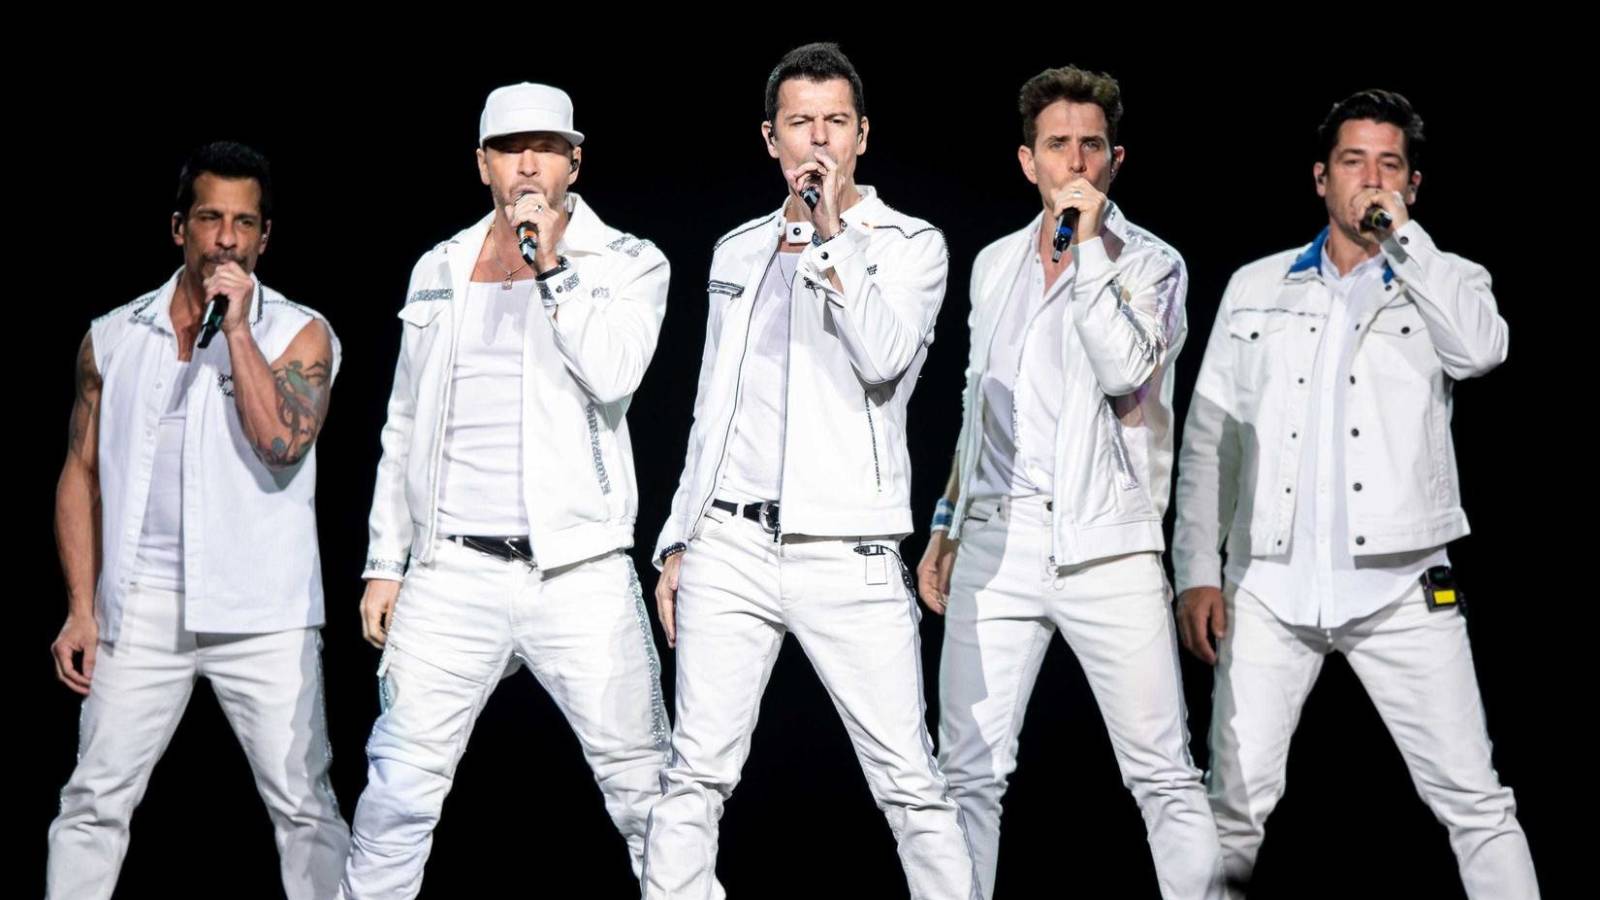 New Kids on the Block perform medley with Kelly Clarkson and Salt-N-Pepa.